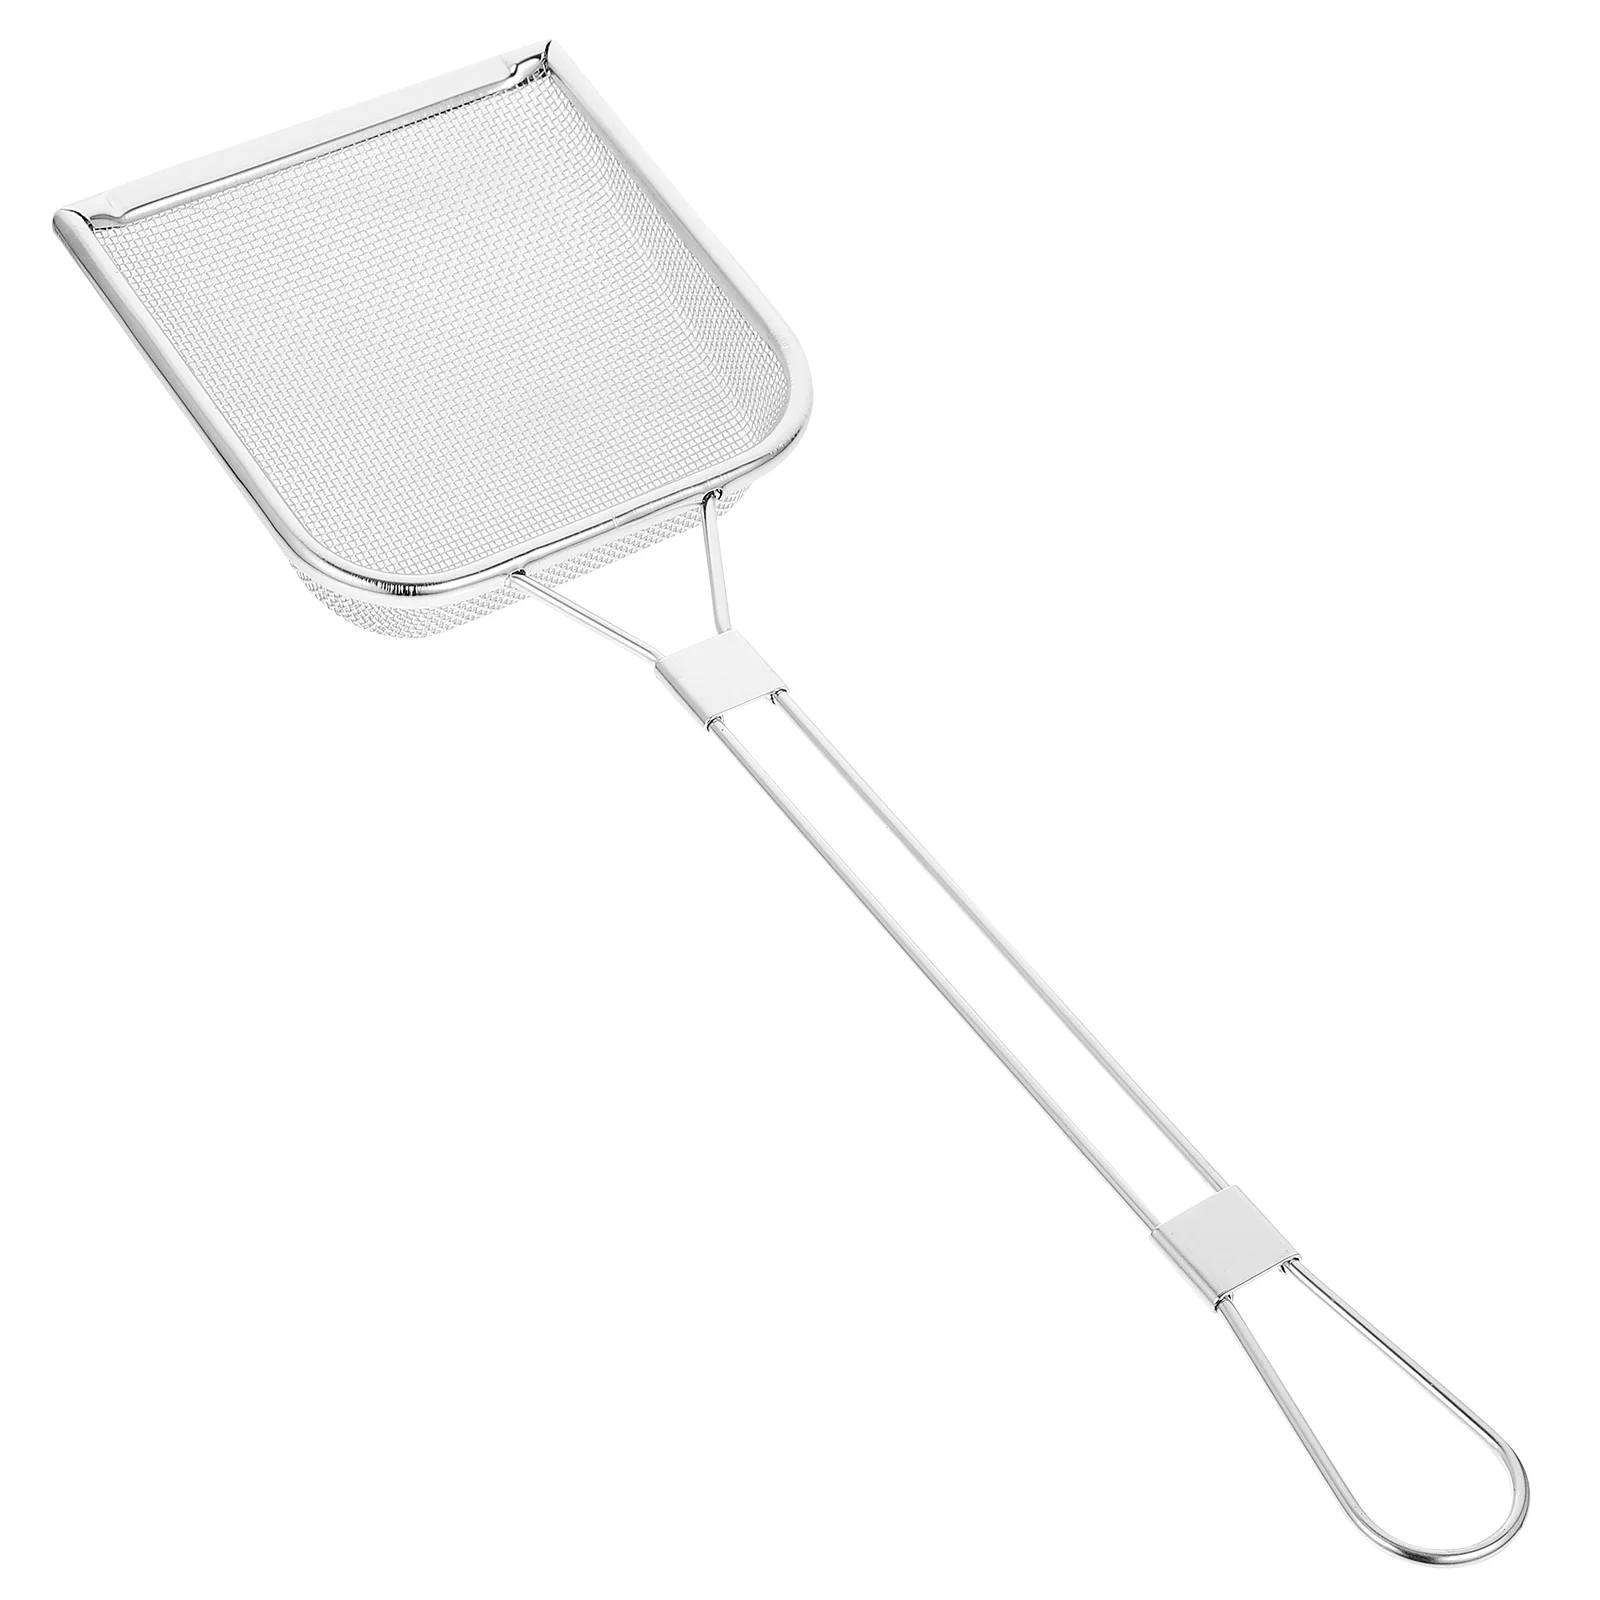 

Square Mesh Skimmer Stainless Steel Colander Spoon Fry Ladle Scoop Kitchen Gadgets